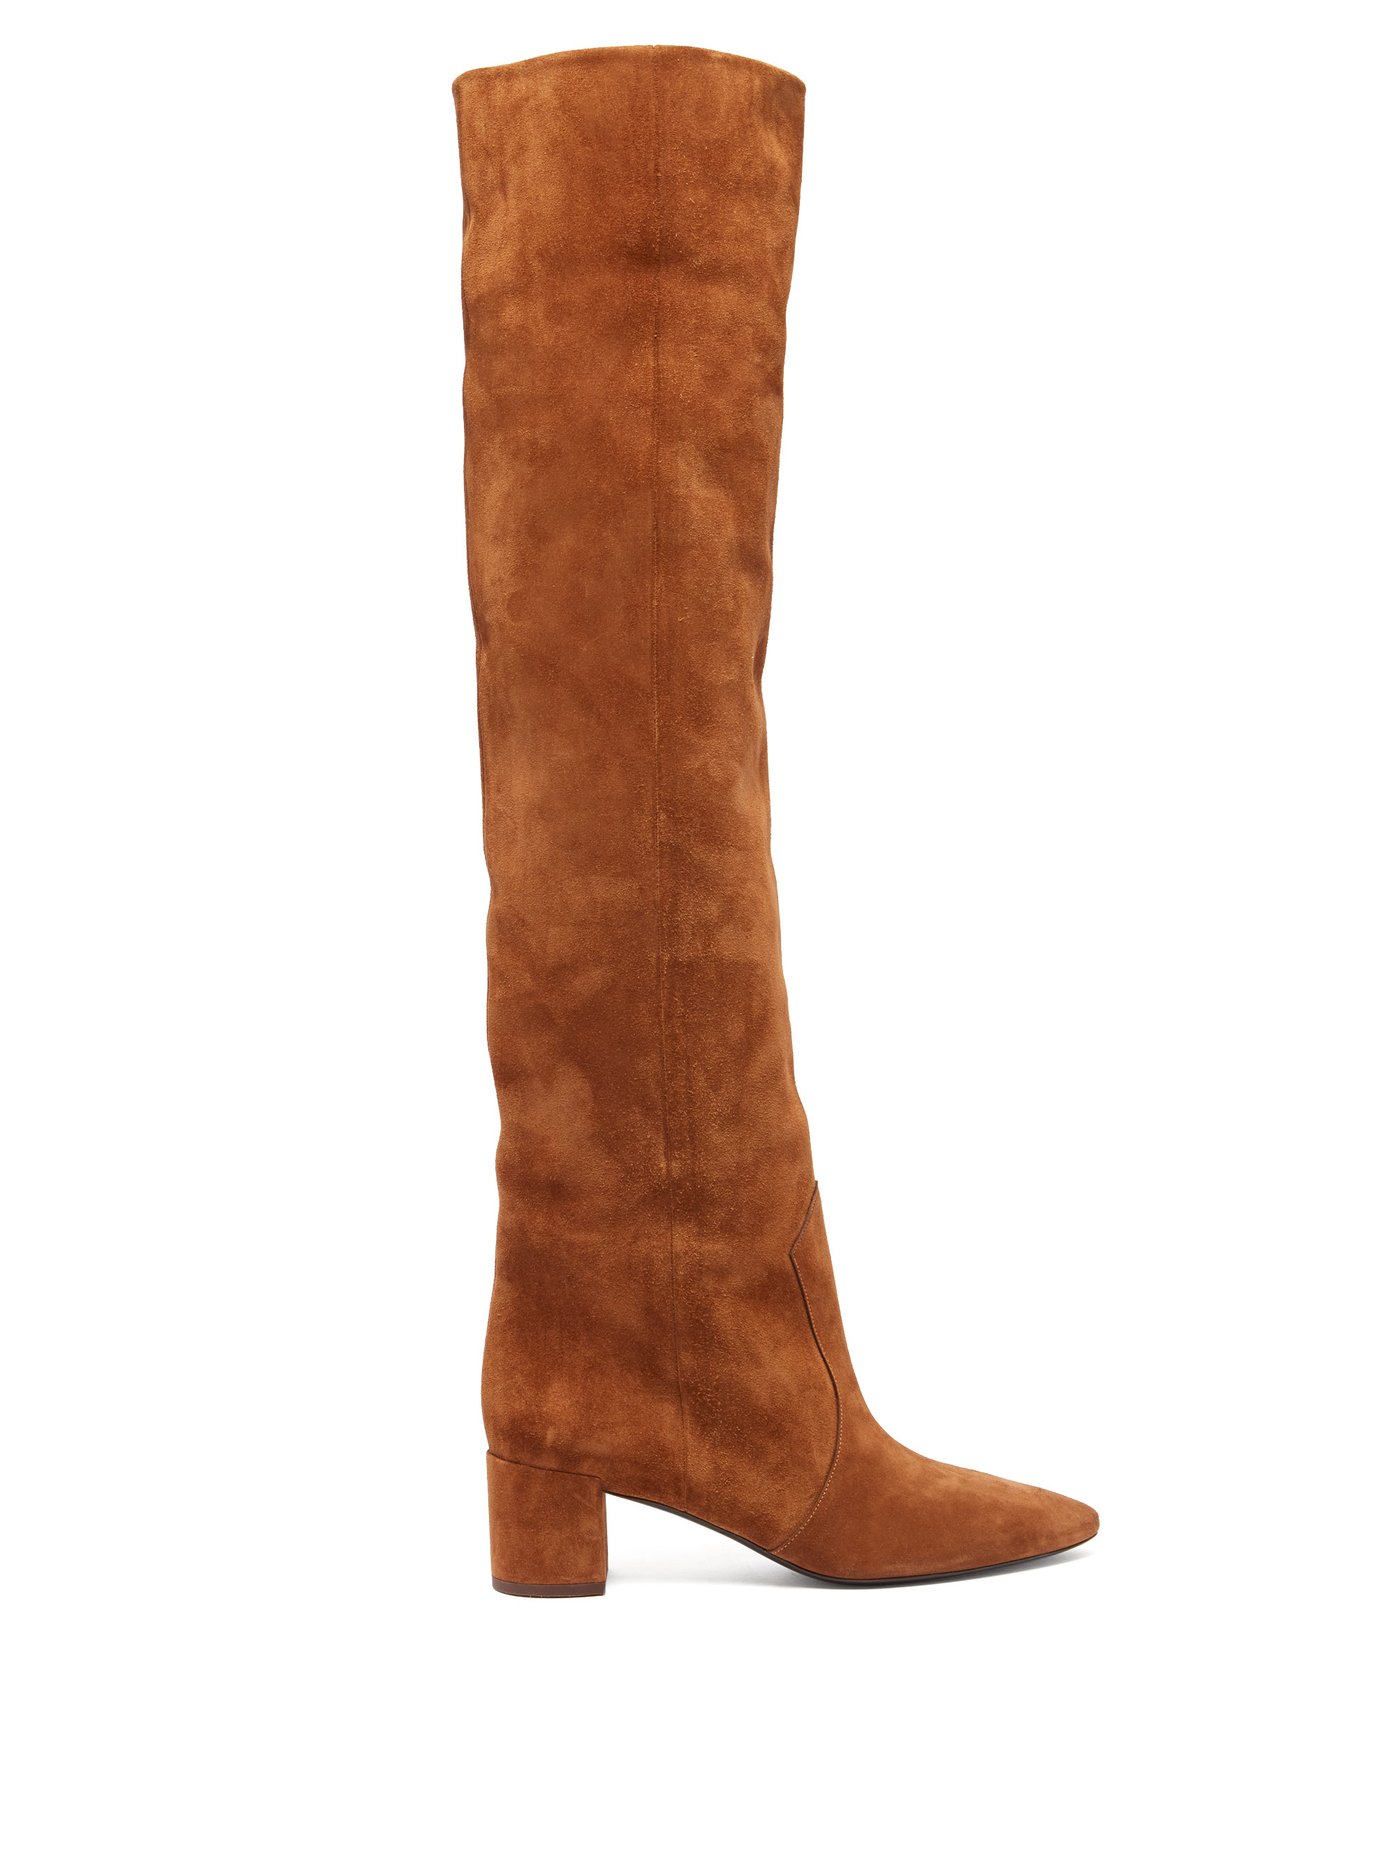 Lou suede over-the-knee boots | Saint 